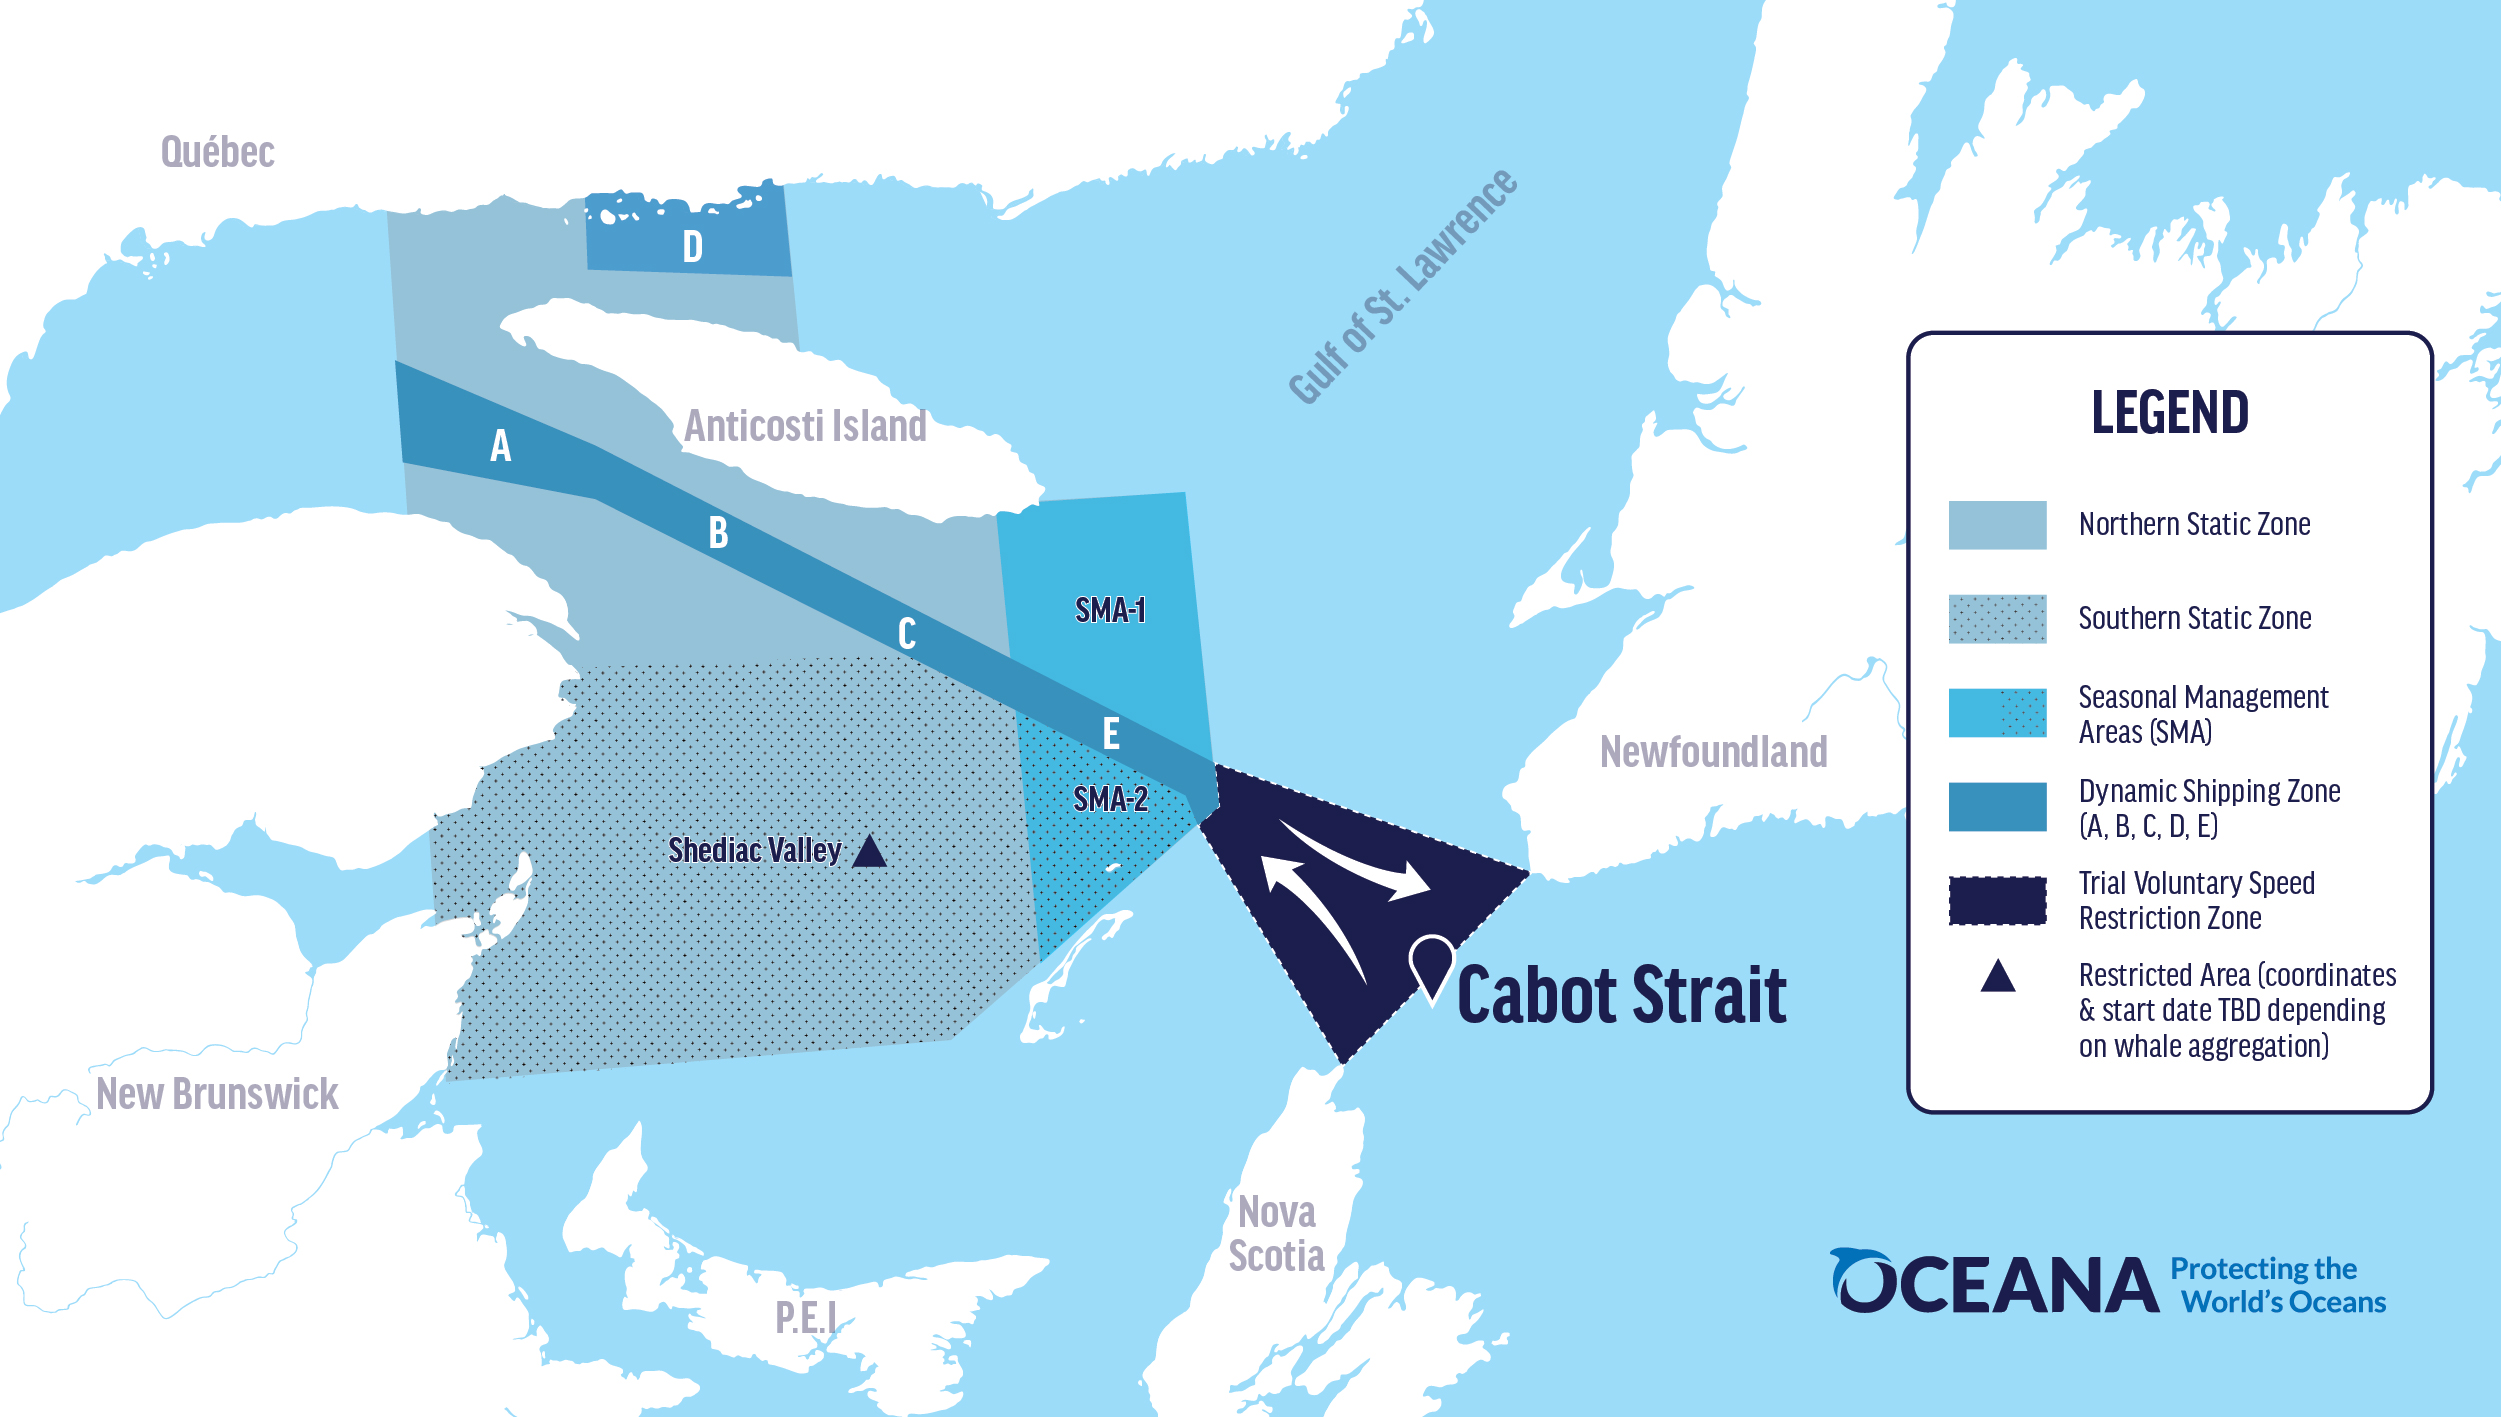 Voluntary speed restriction zone in the Cabot Strait